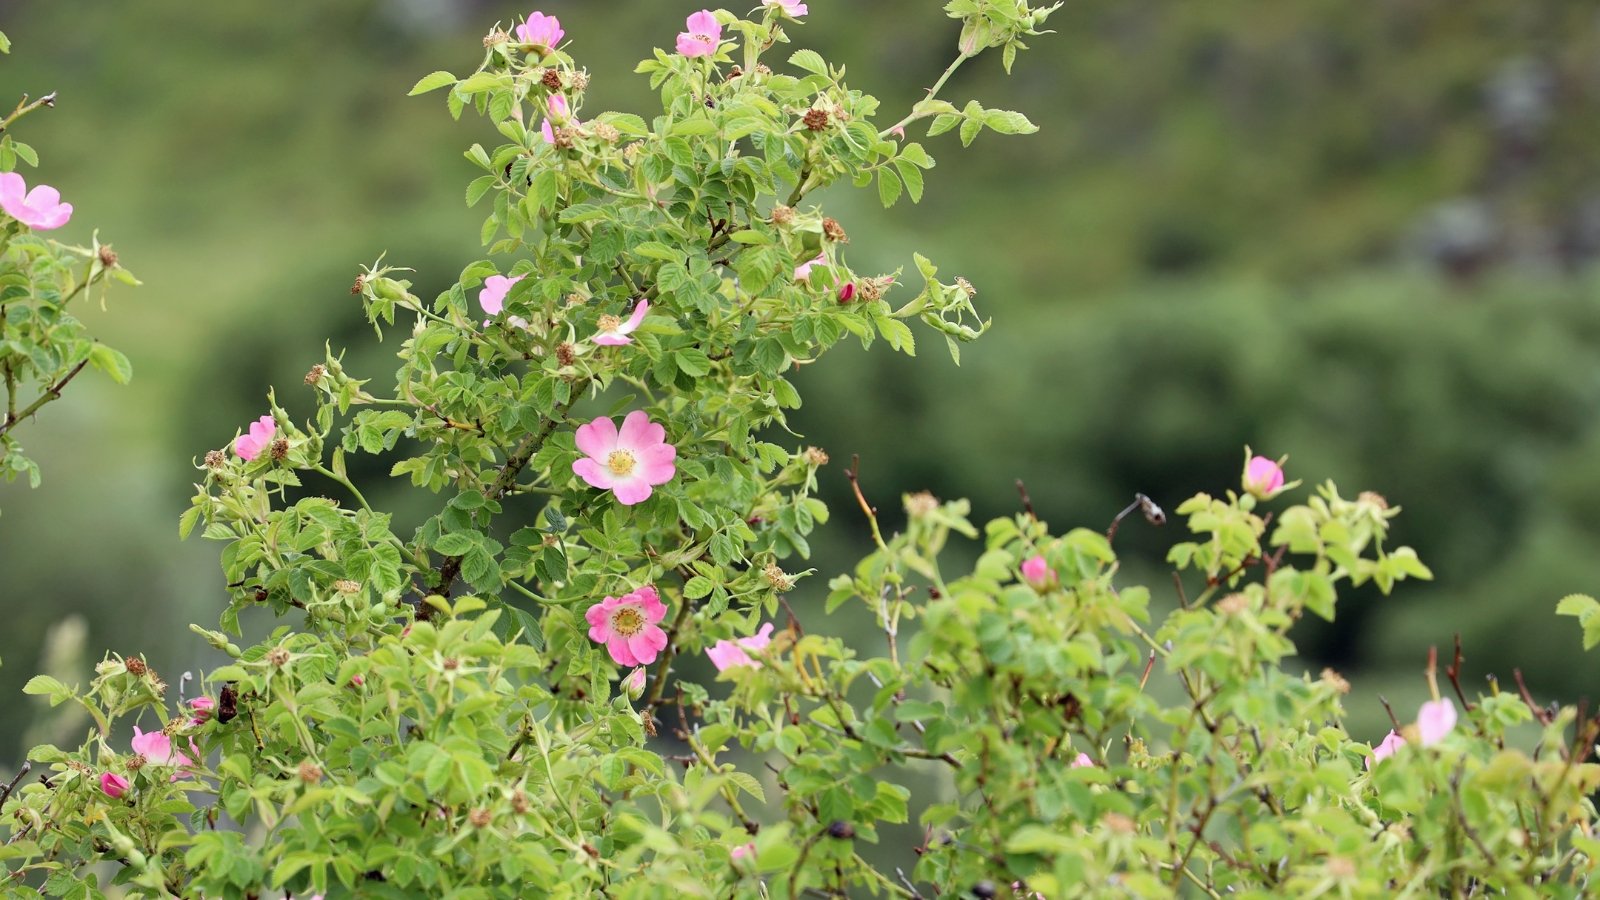 Sweet Briar Rose displays arching, thorny stems, bright green, apple-scented leaves, and simple, pink flowers with prominent yellow centers.